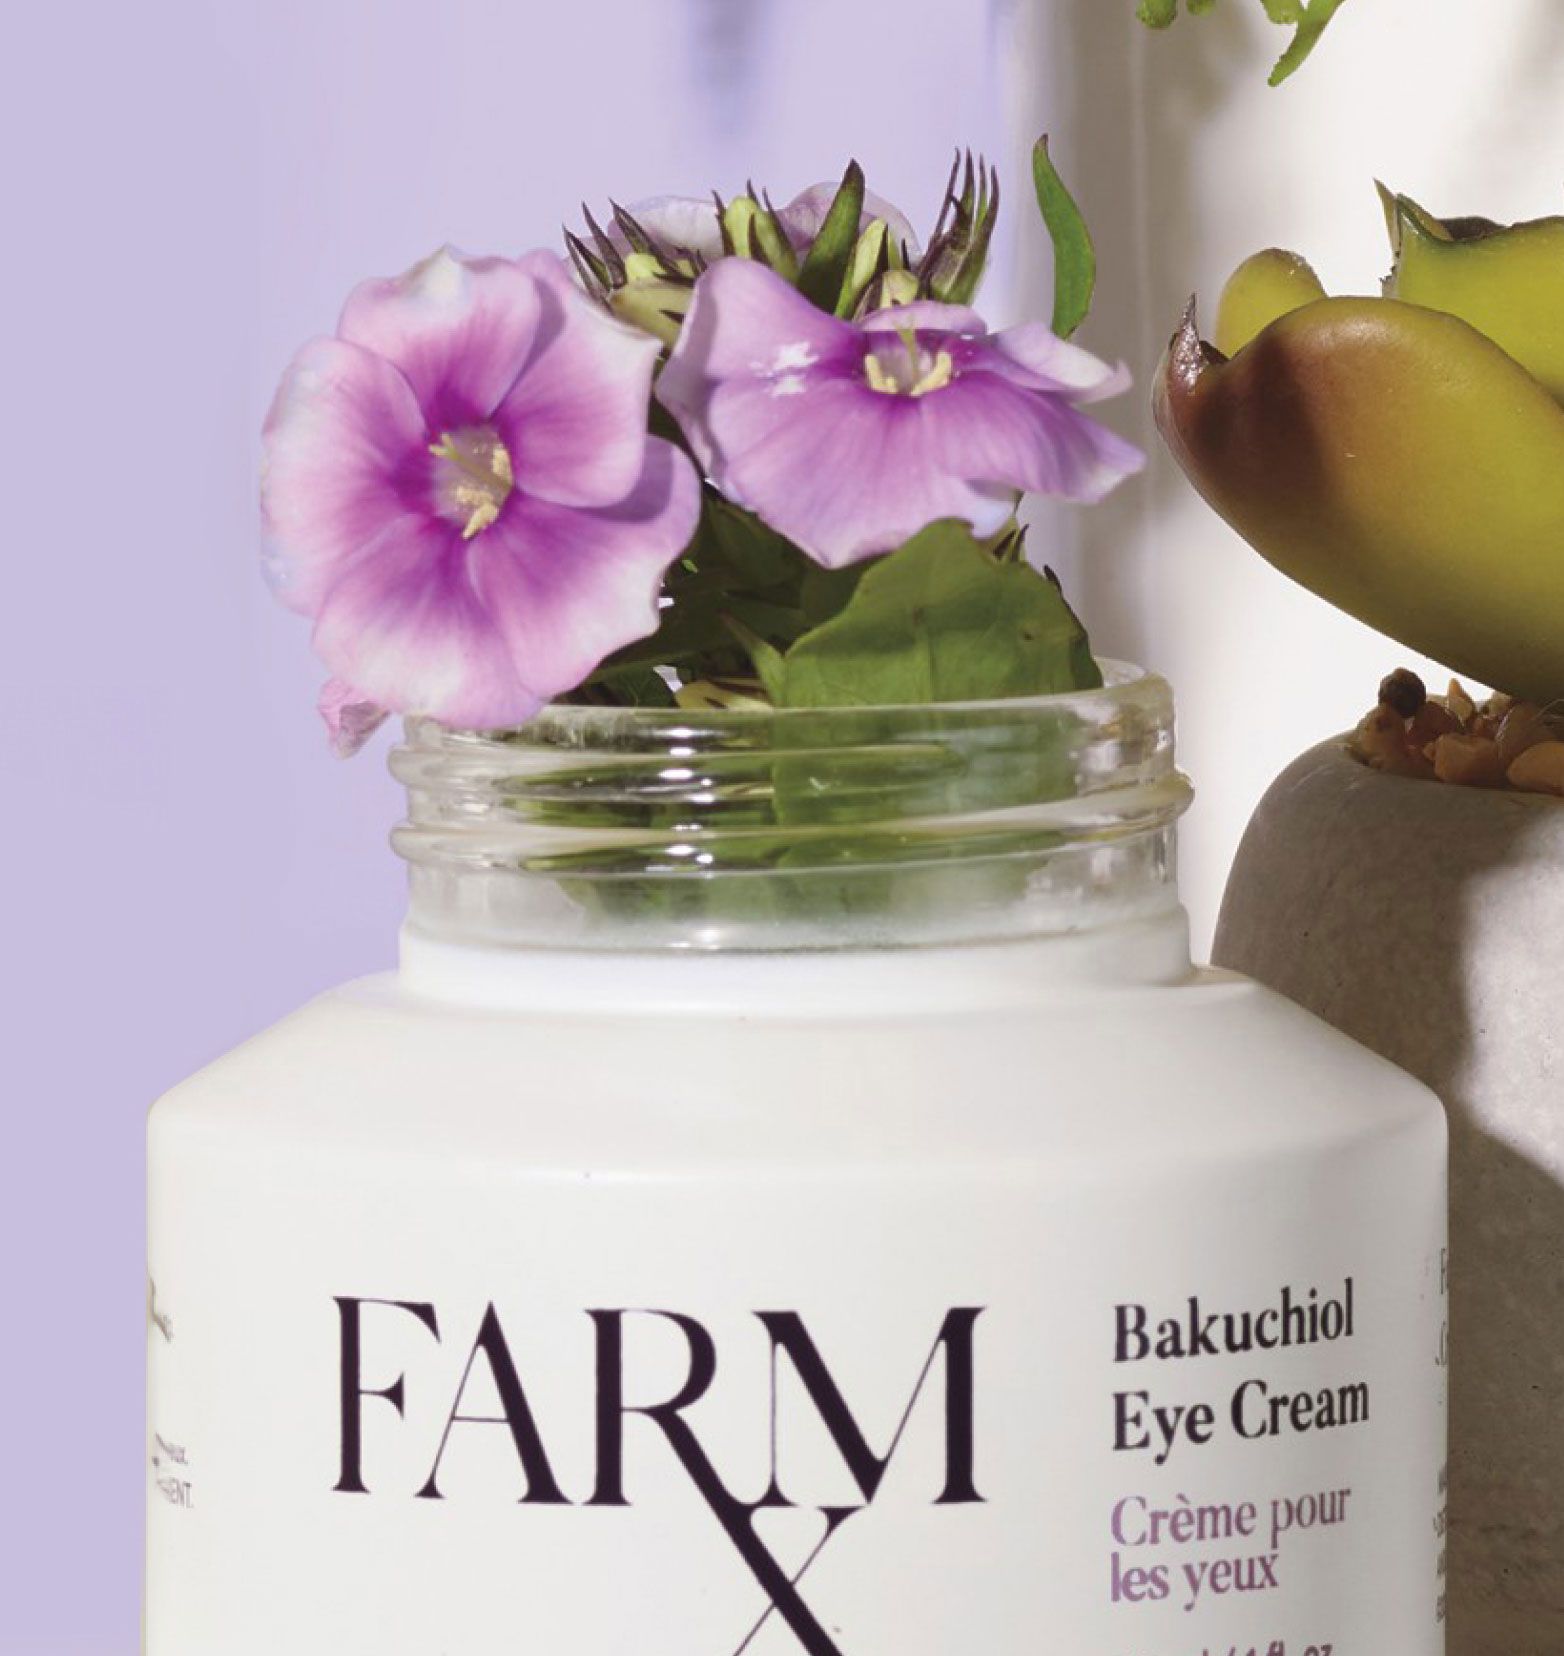 A jar of Farm RX Bakuchiol Eye Cream with purple flowers blossoming from the top of the jar.